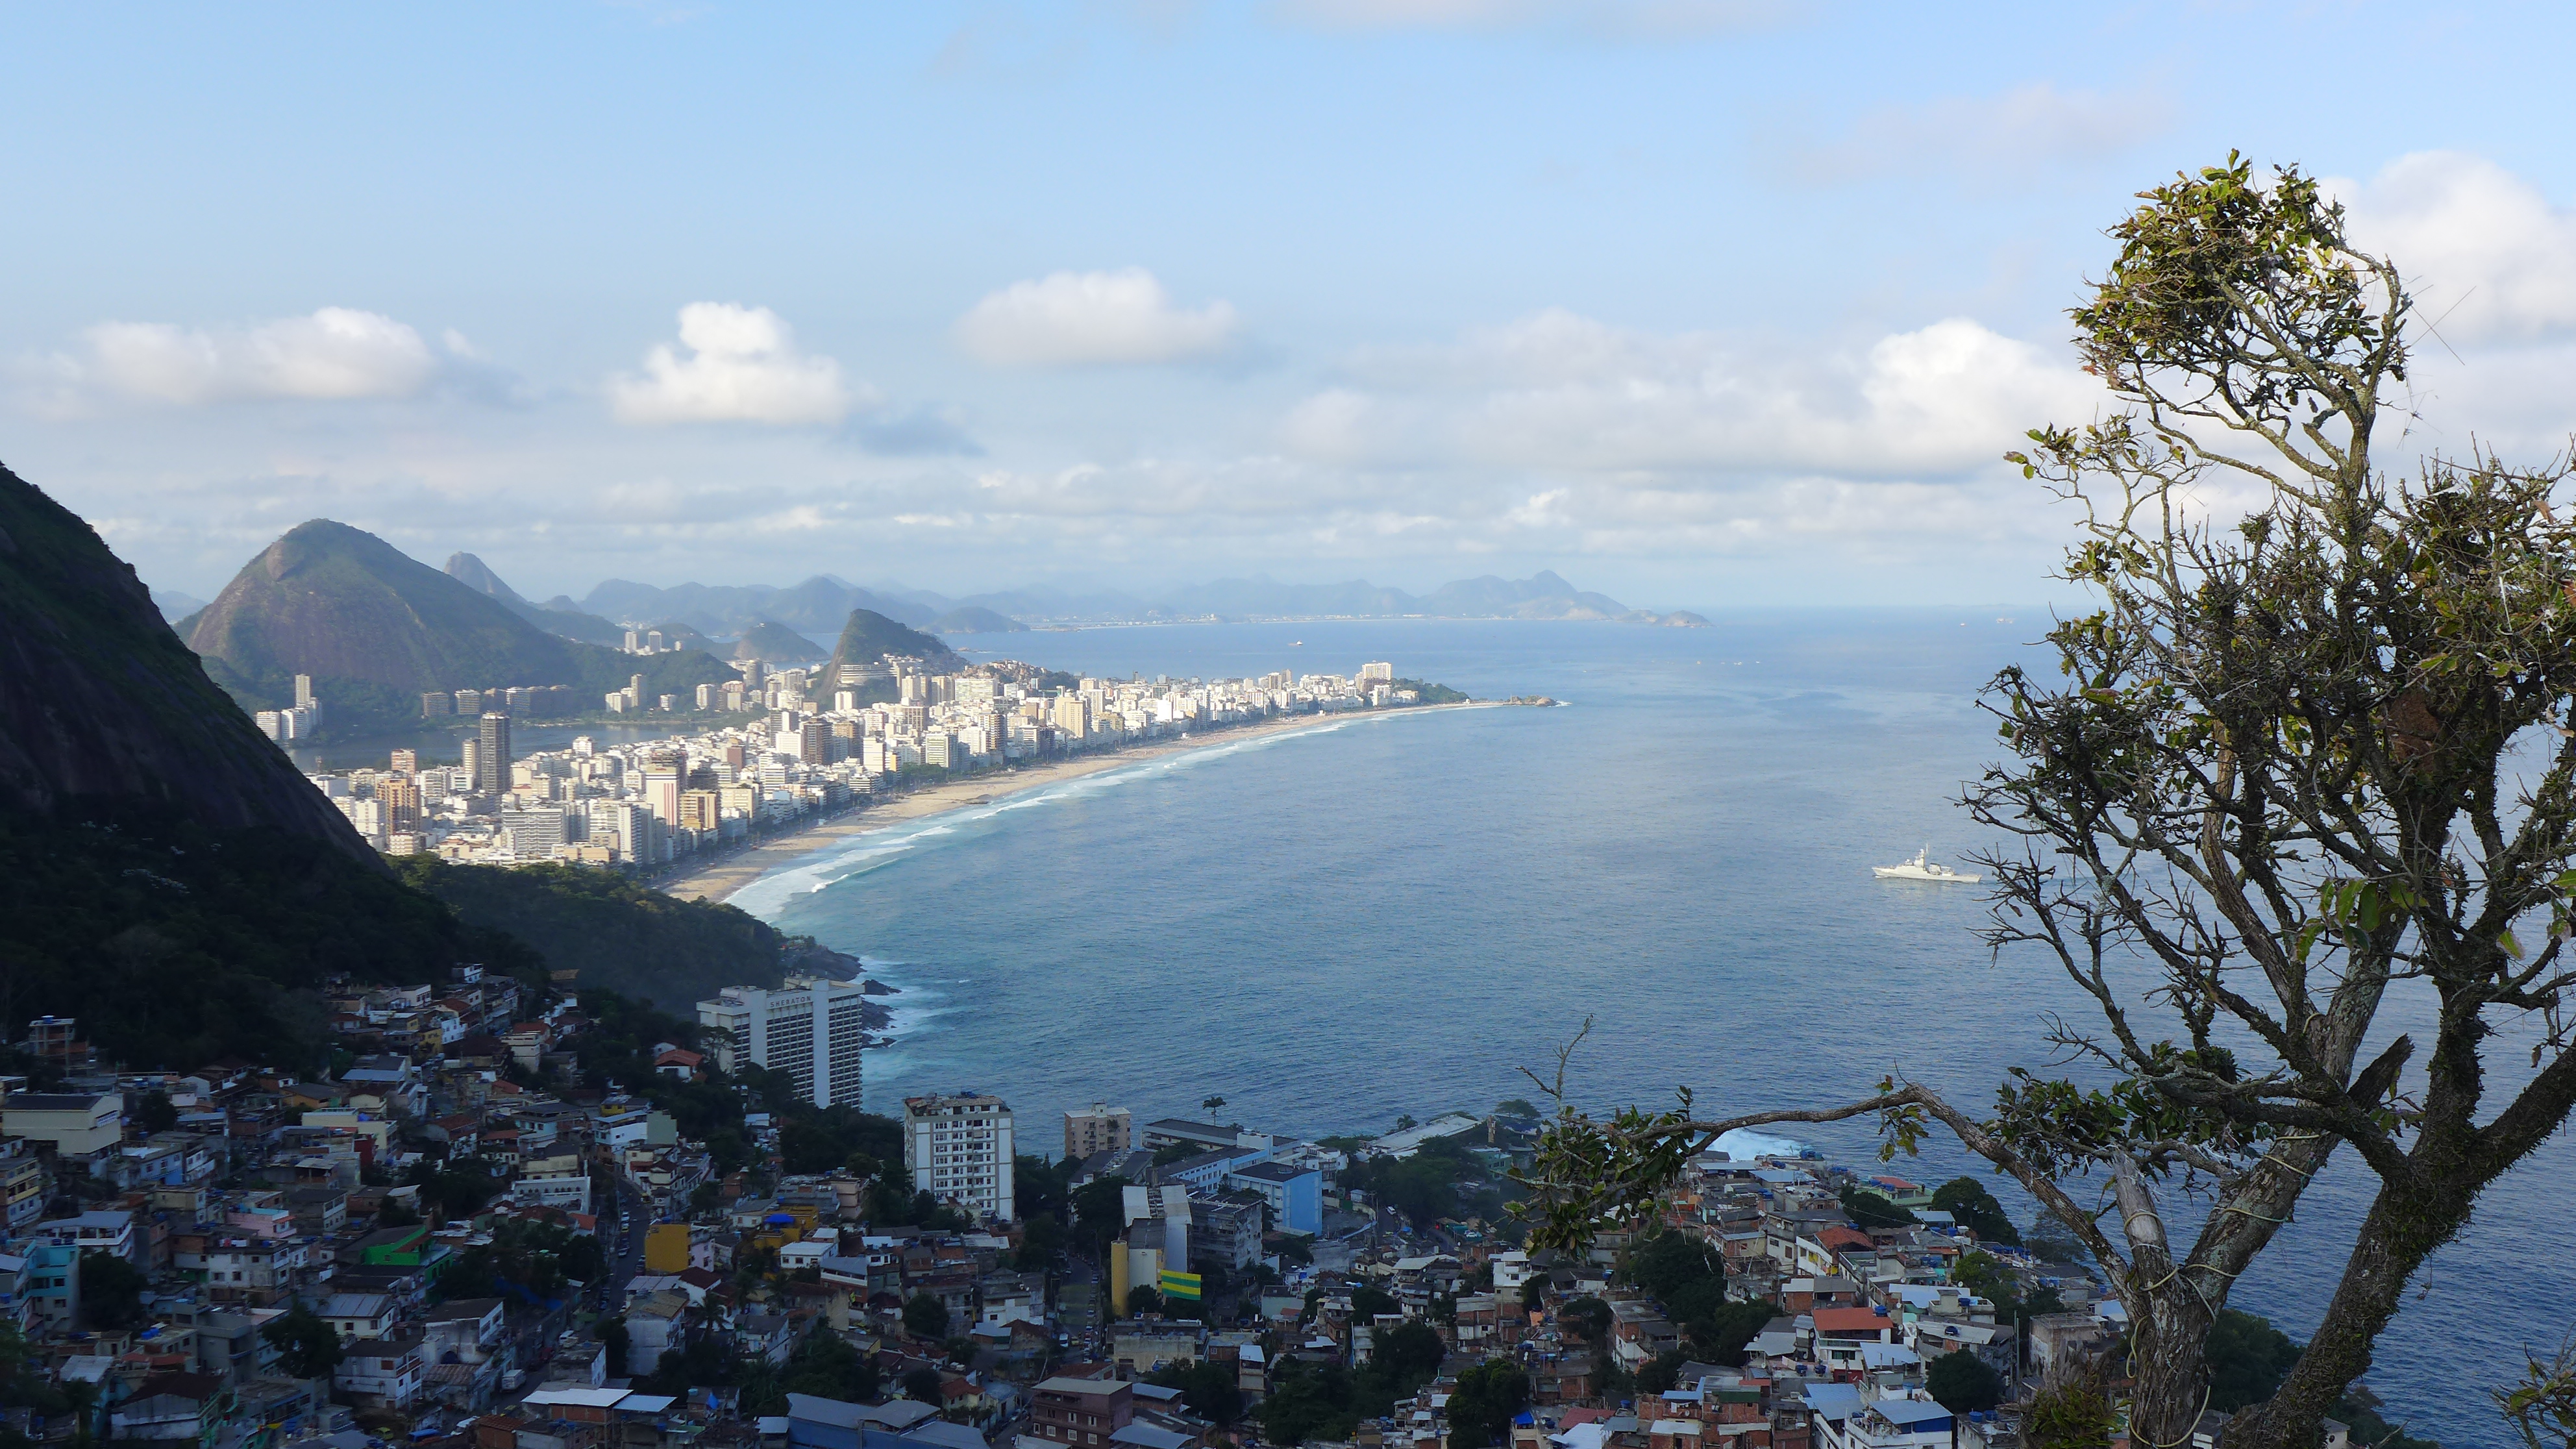 View from the top of Vidigal.